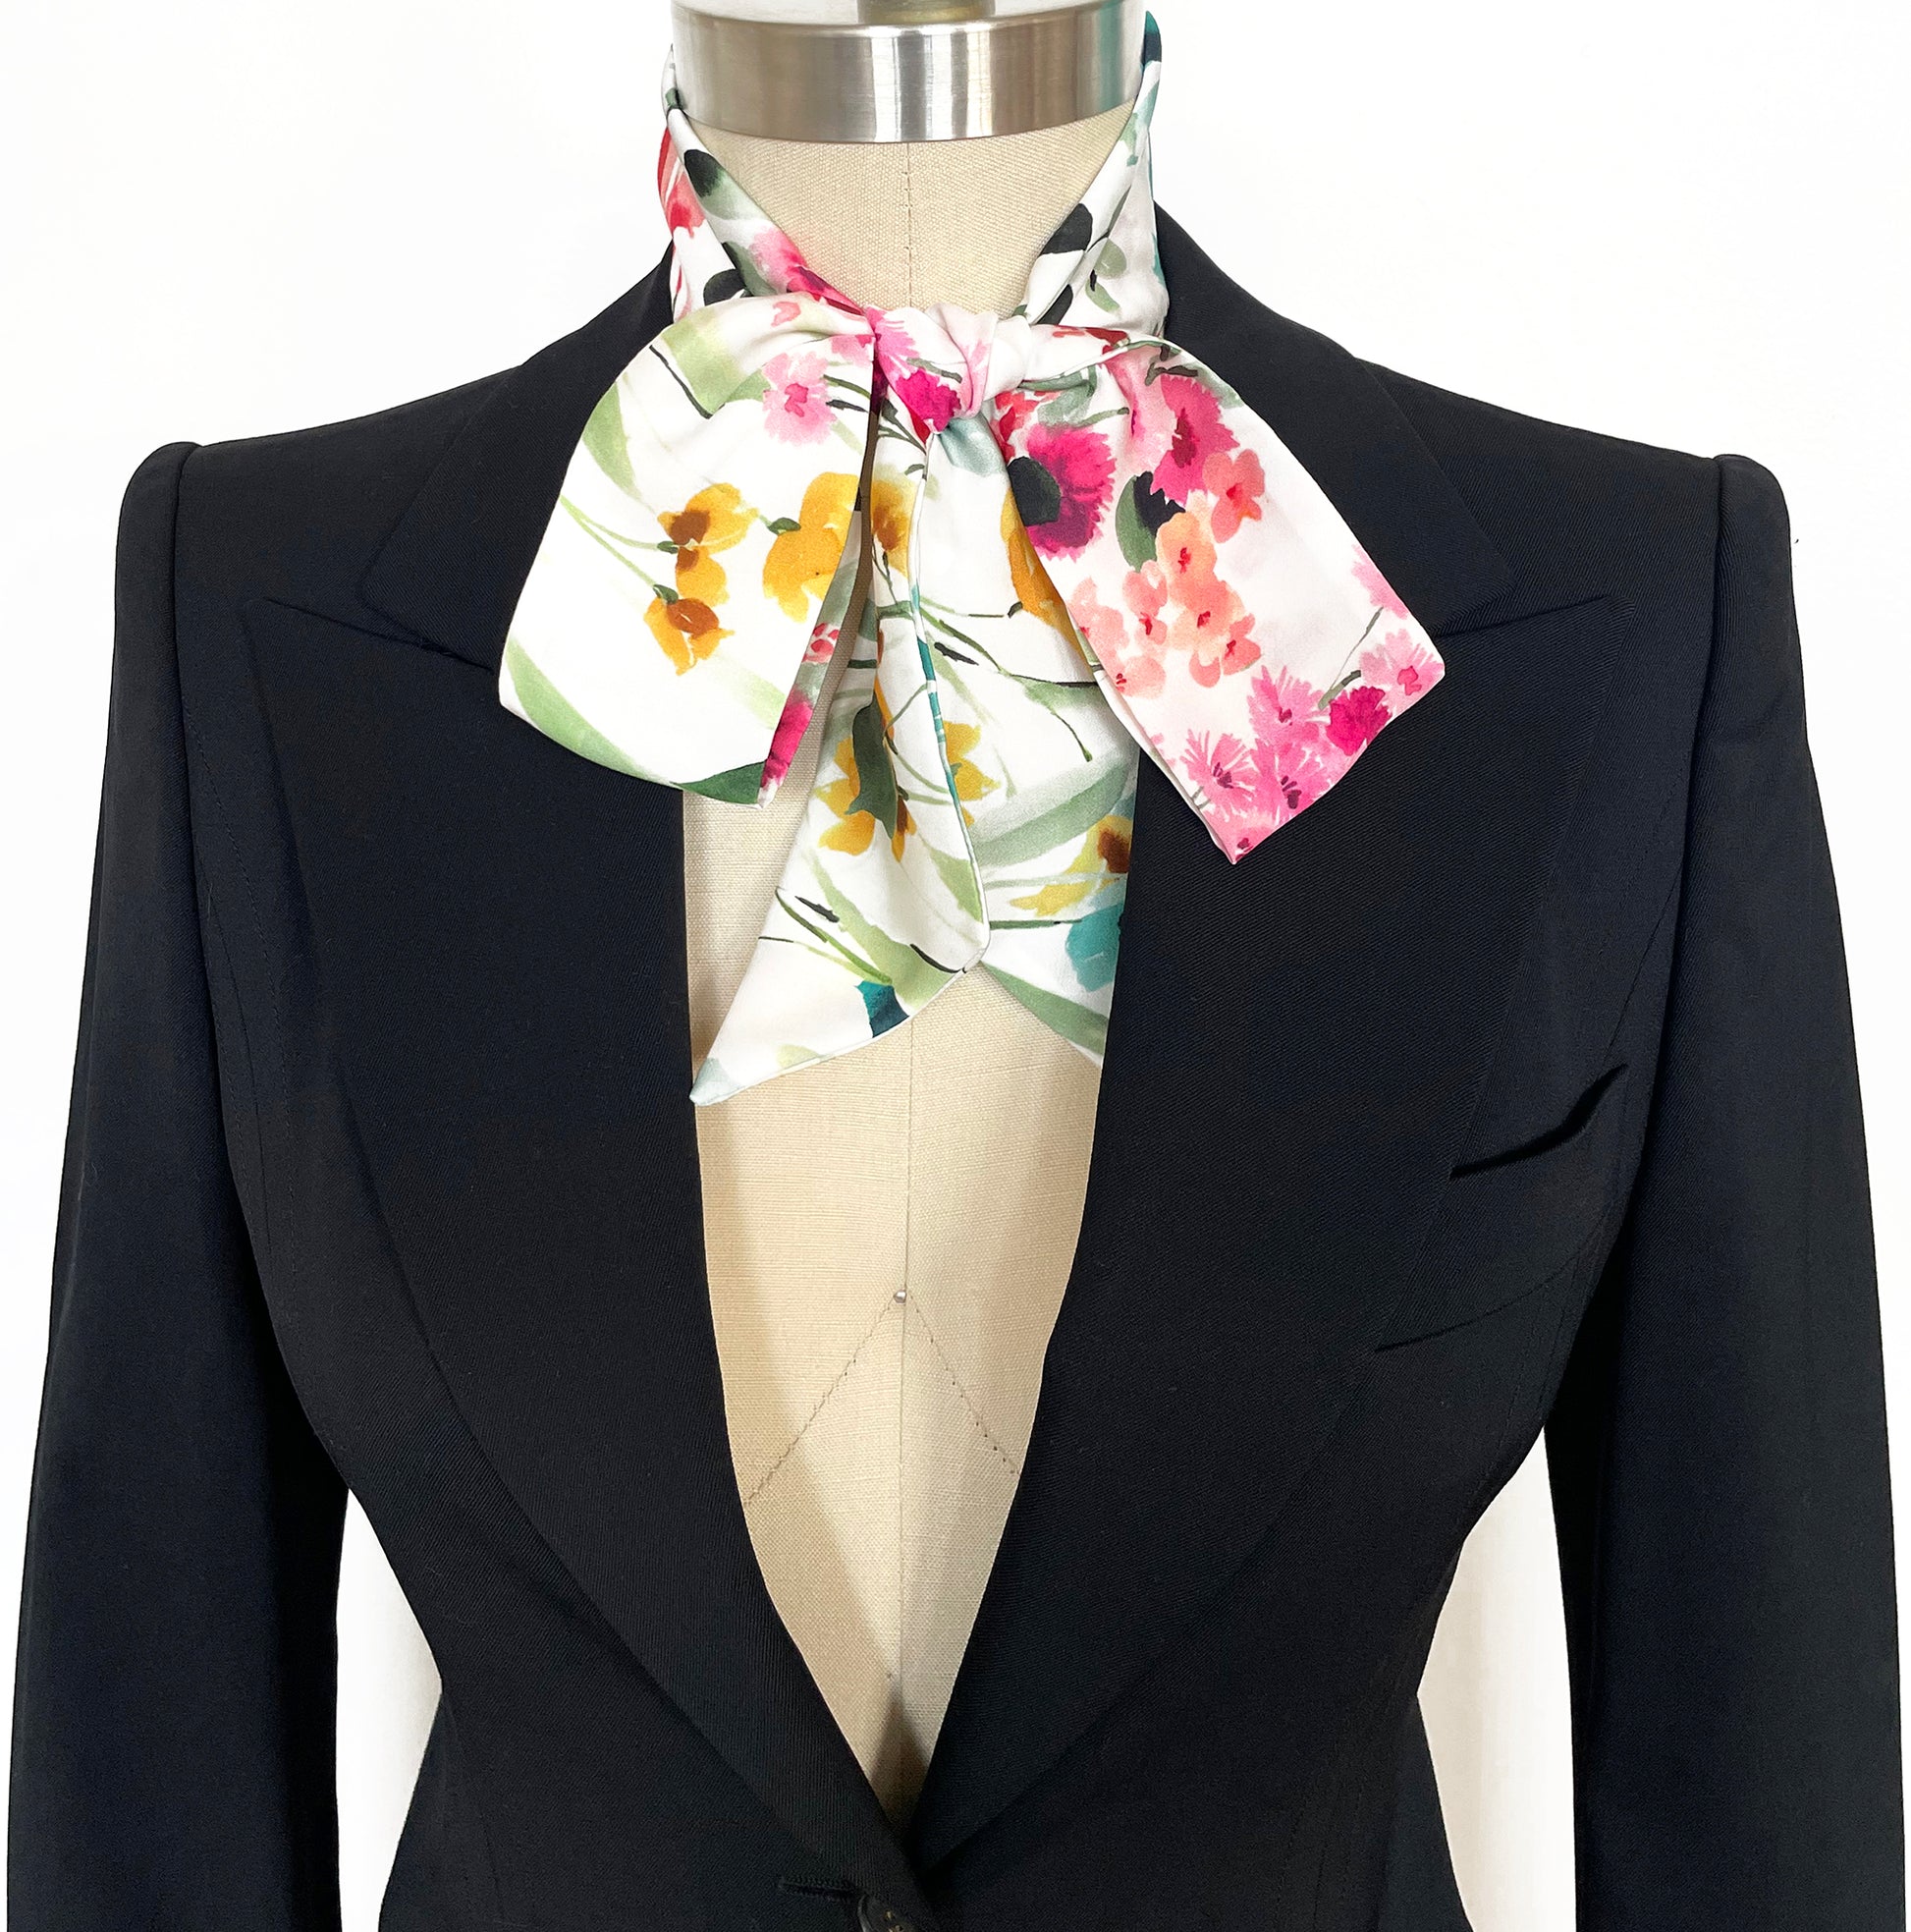 Japanese Floral Print Twilly Scarf, Neck Bow, Neck Tie – Multi Chic